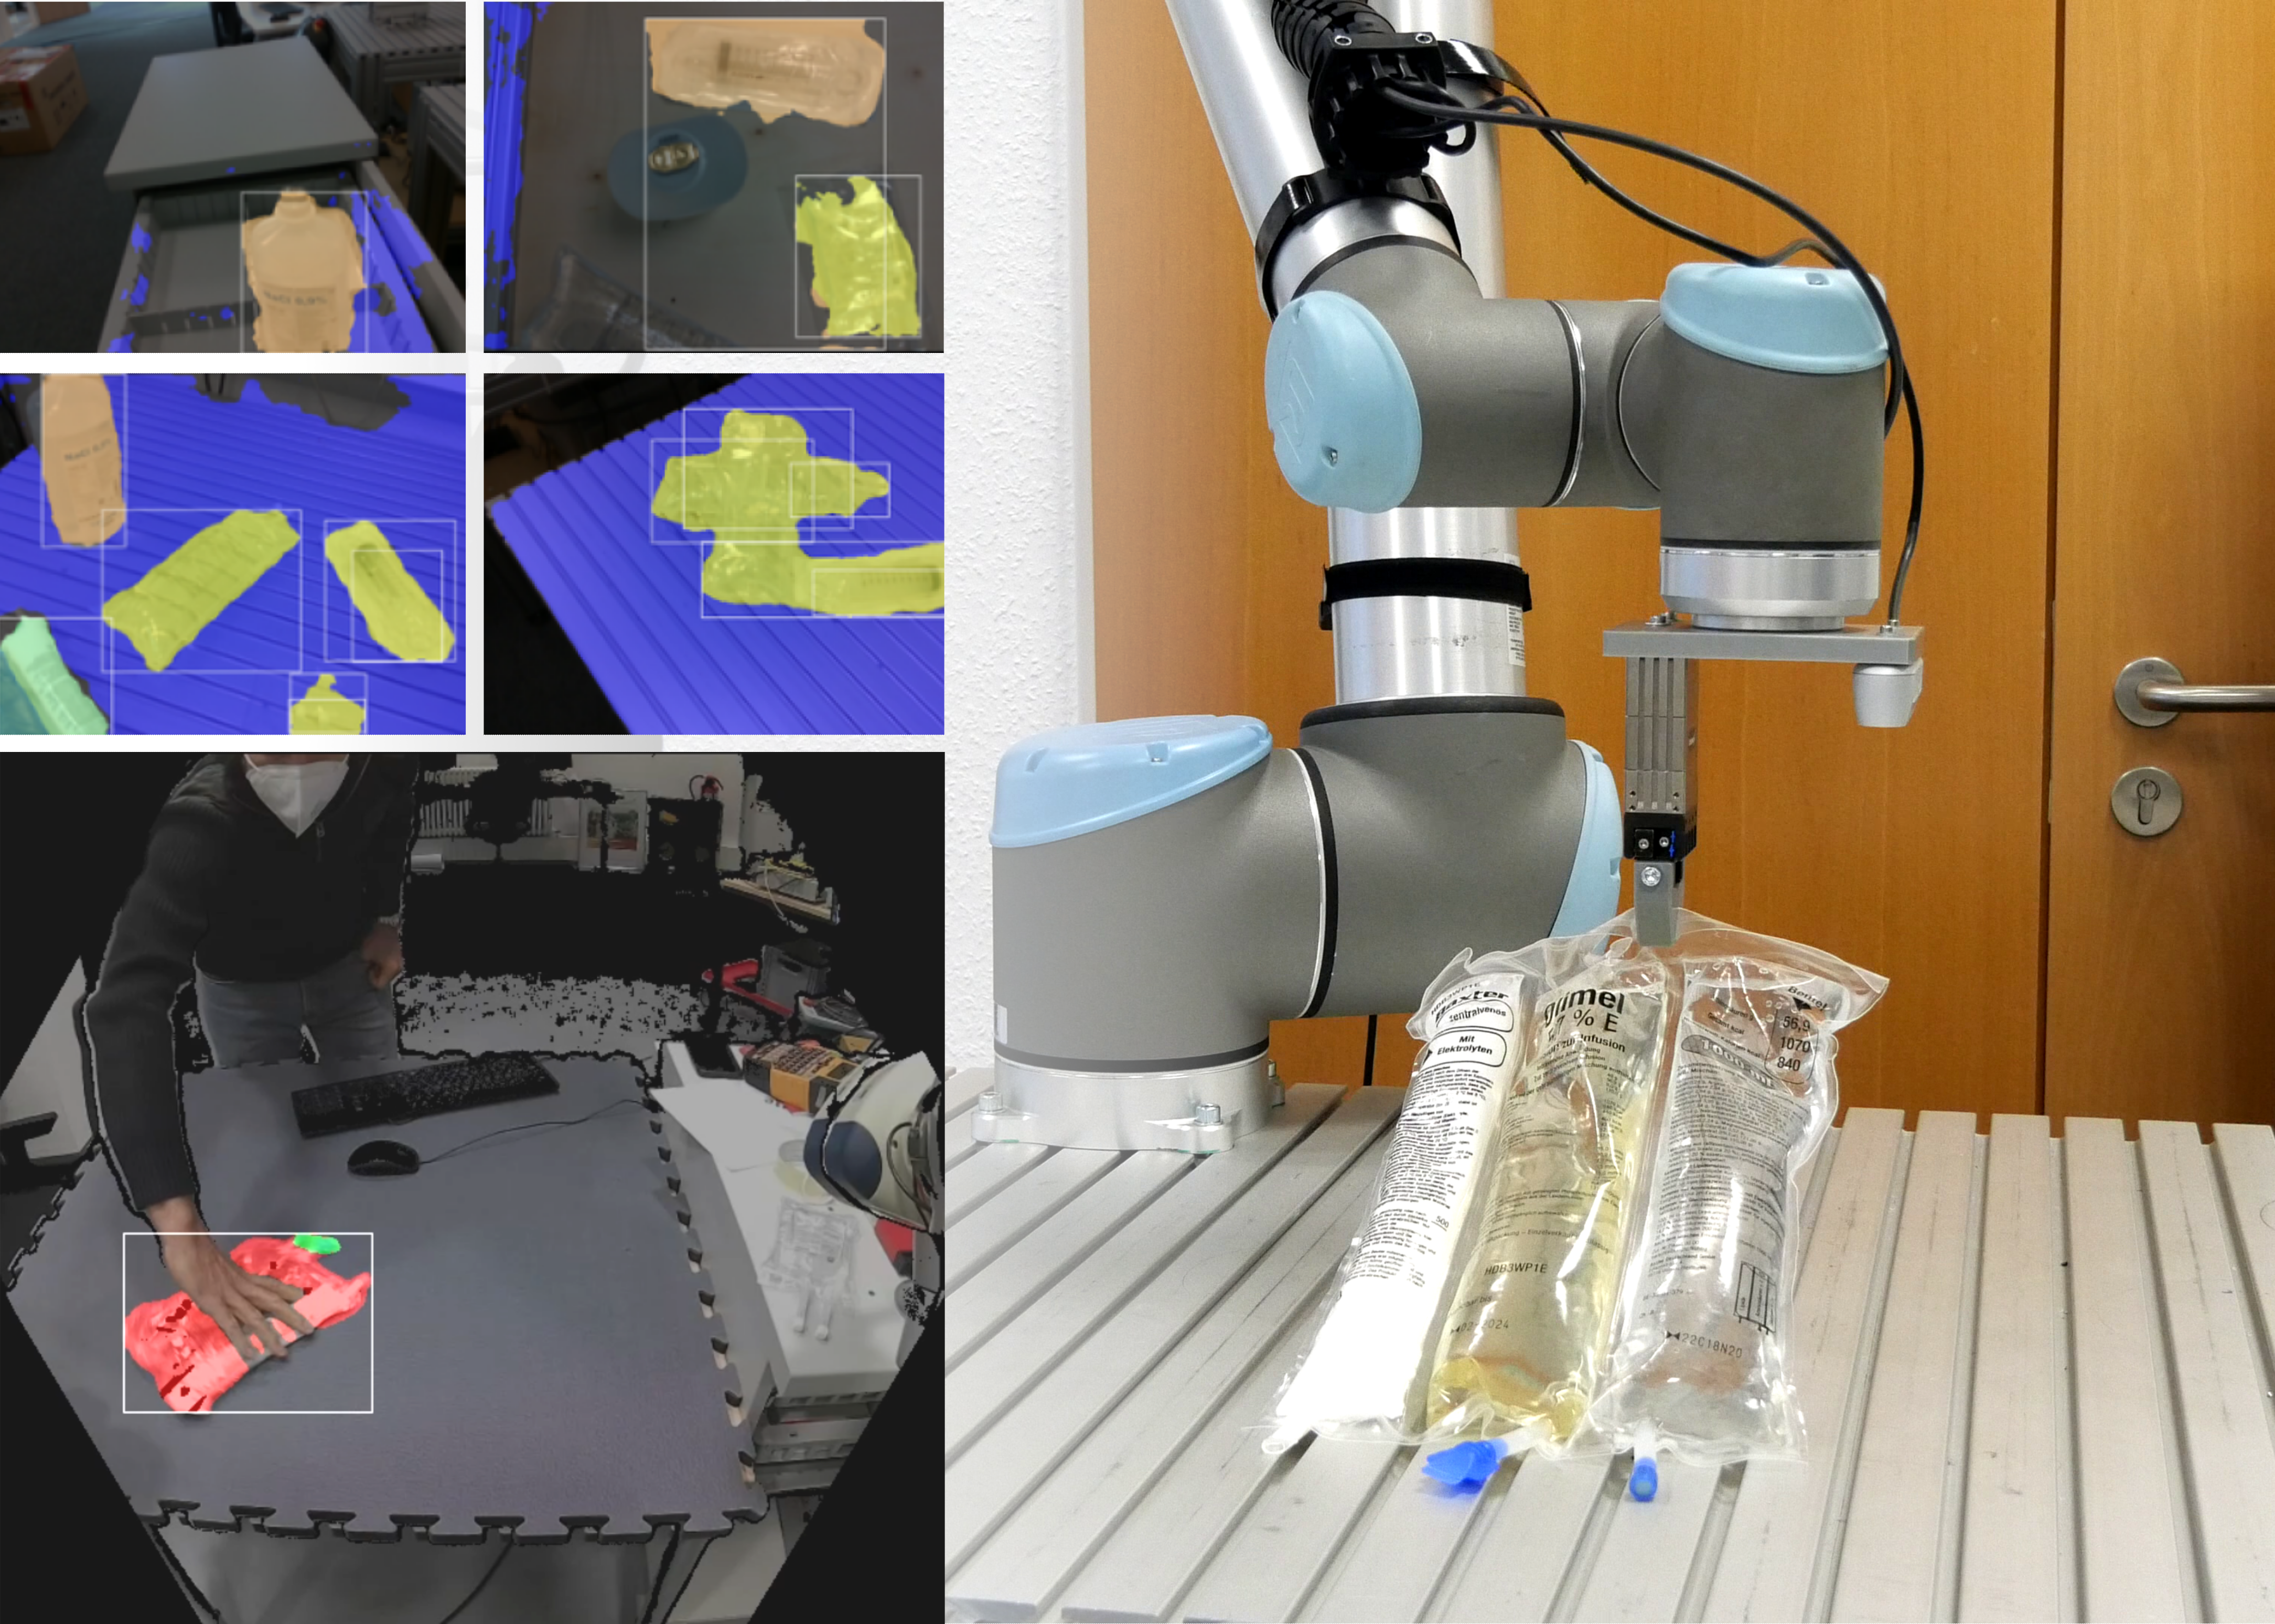 EfficientPPS enables the part panoptic segmen- tation of transparent objects for robotic manipulation in hospital assistance tasks.